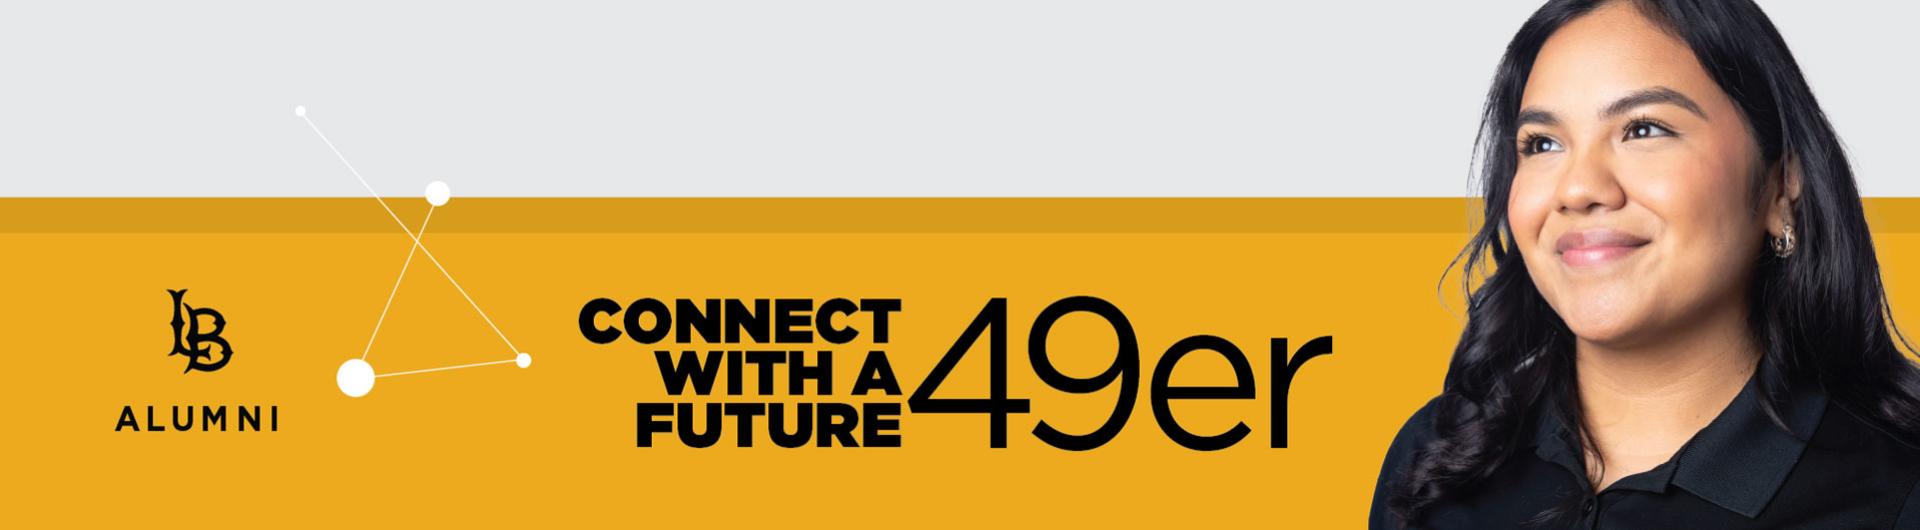 Connect with a Future 49er